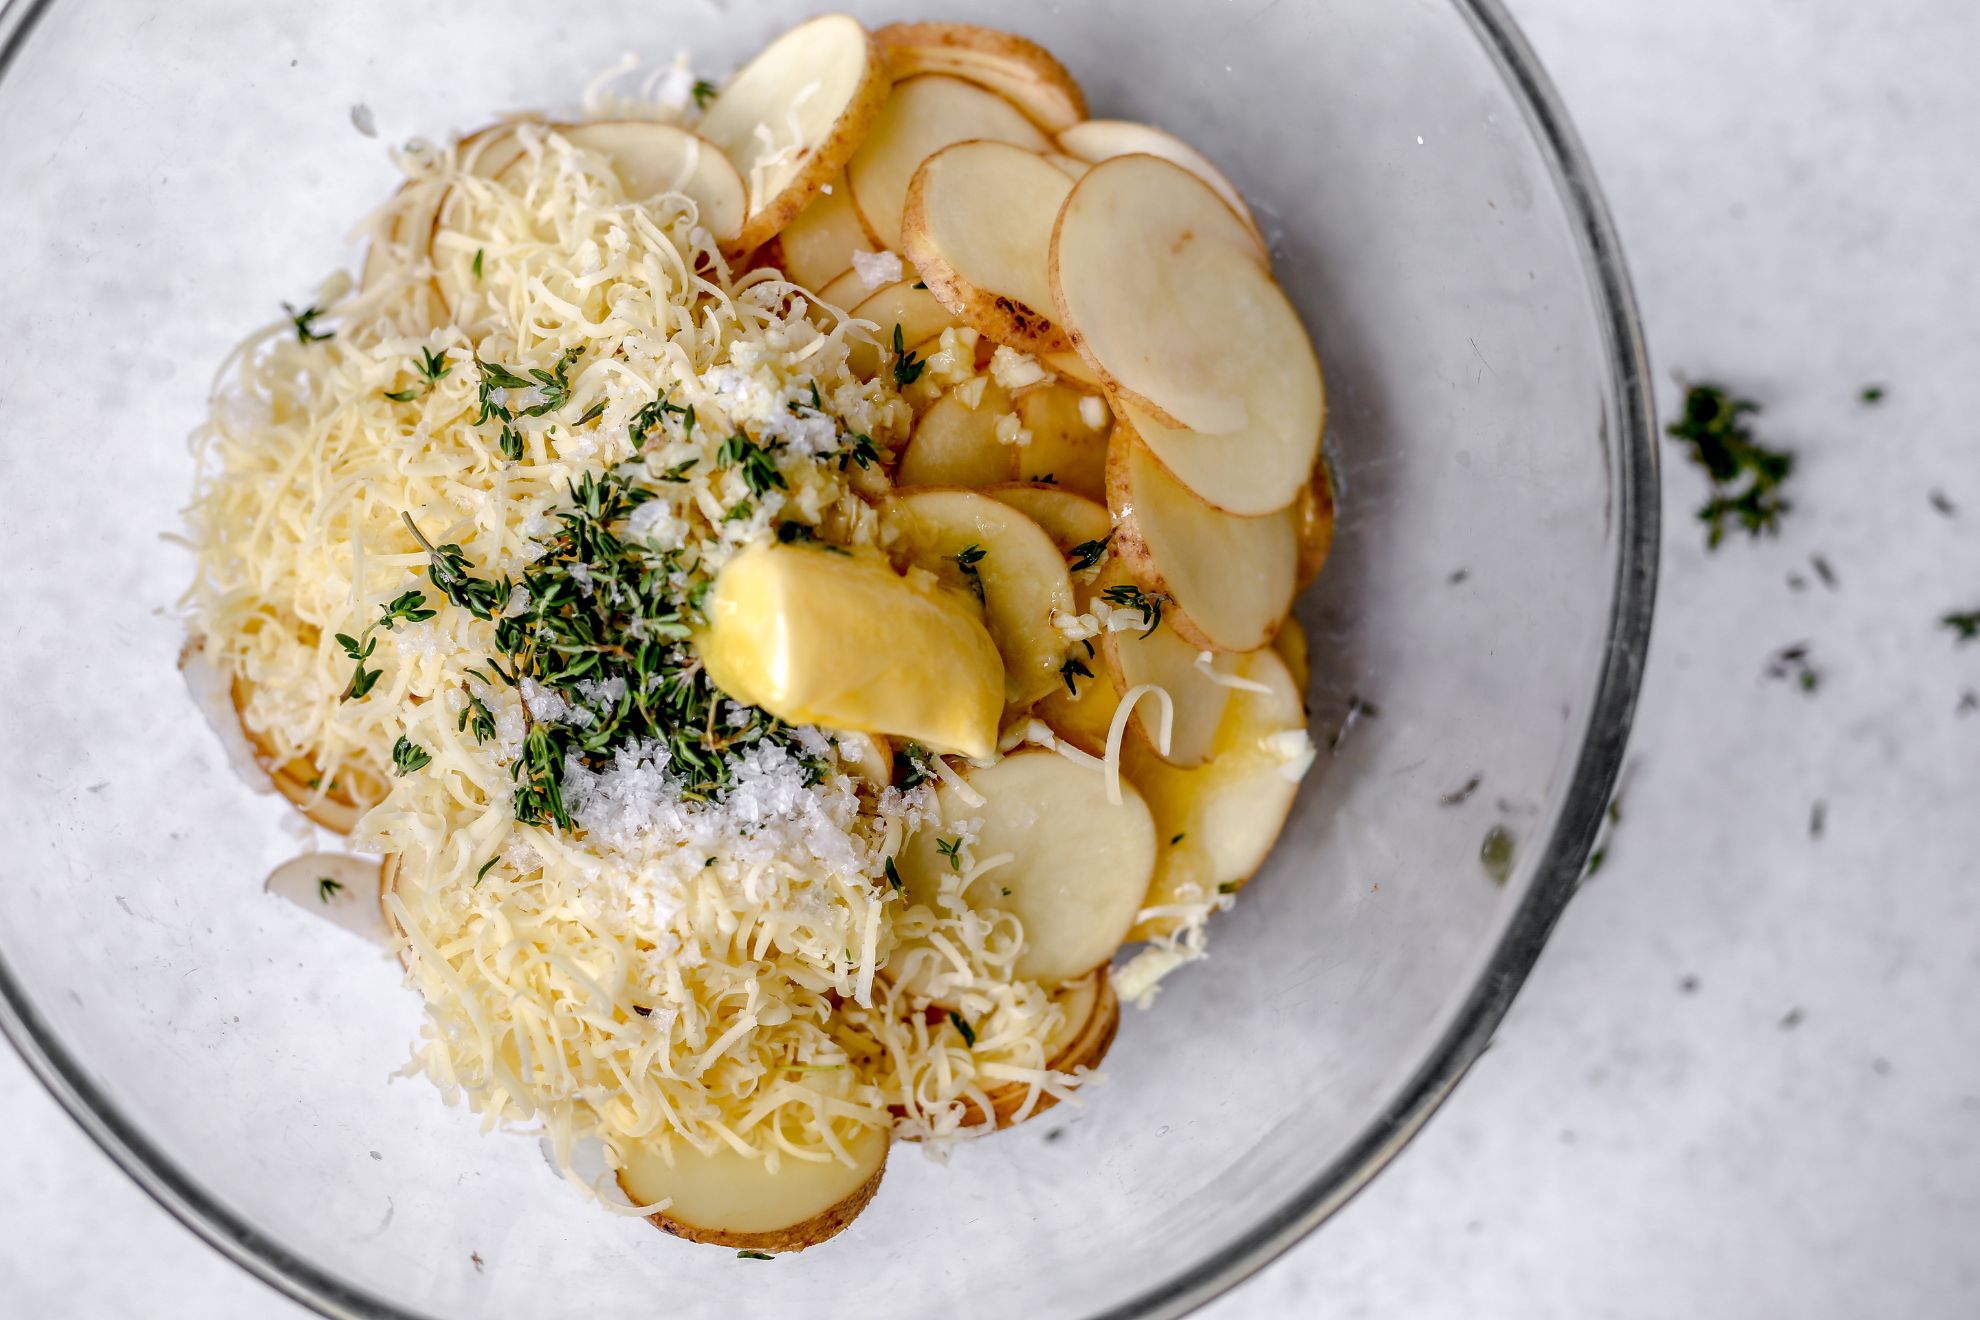 This is an overhead horizontal image of a glass bowl with sliced potatoes, shredded cheese, garlic butter, salt and fresh thyme leaves in it. The bowl sits on a light grey/white surface.